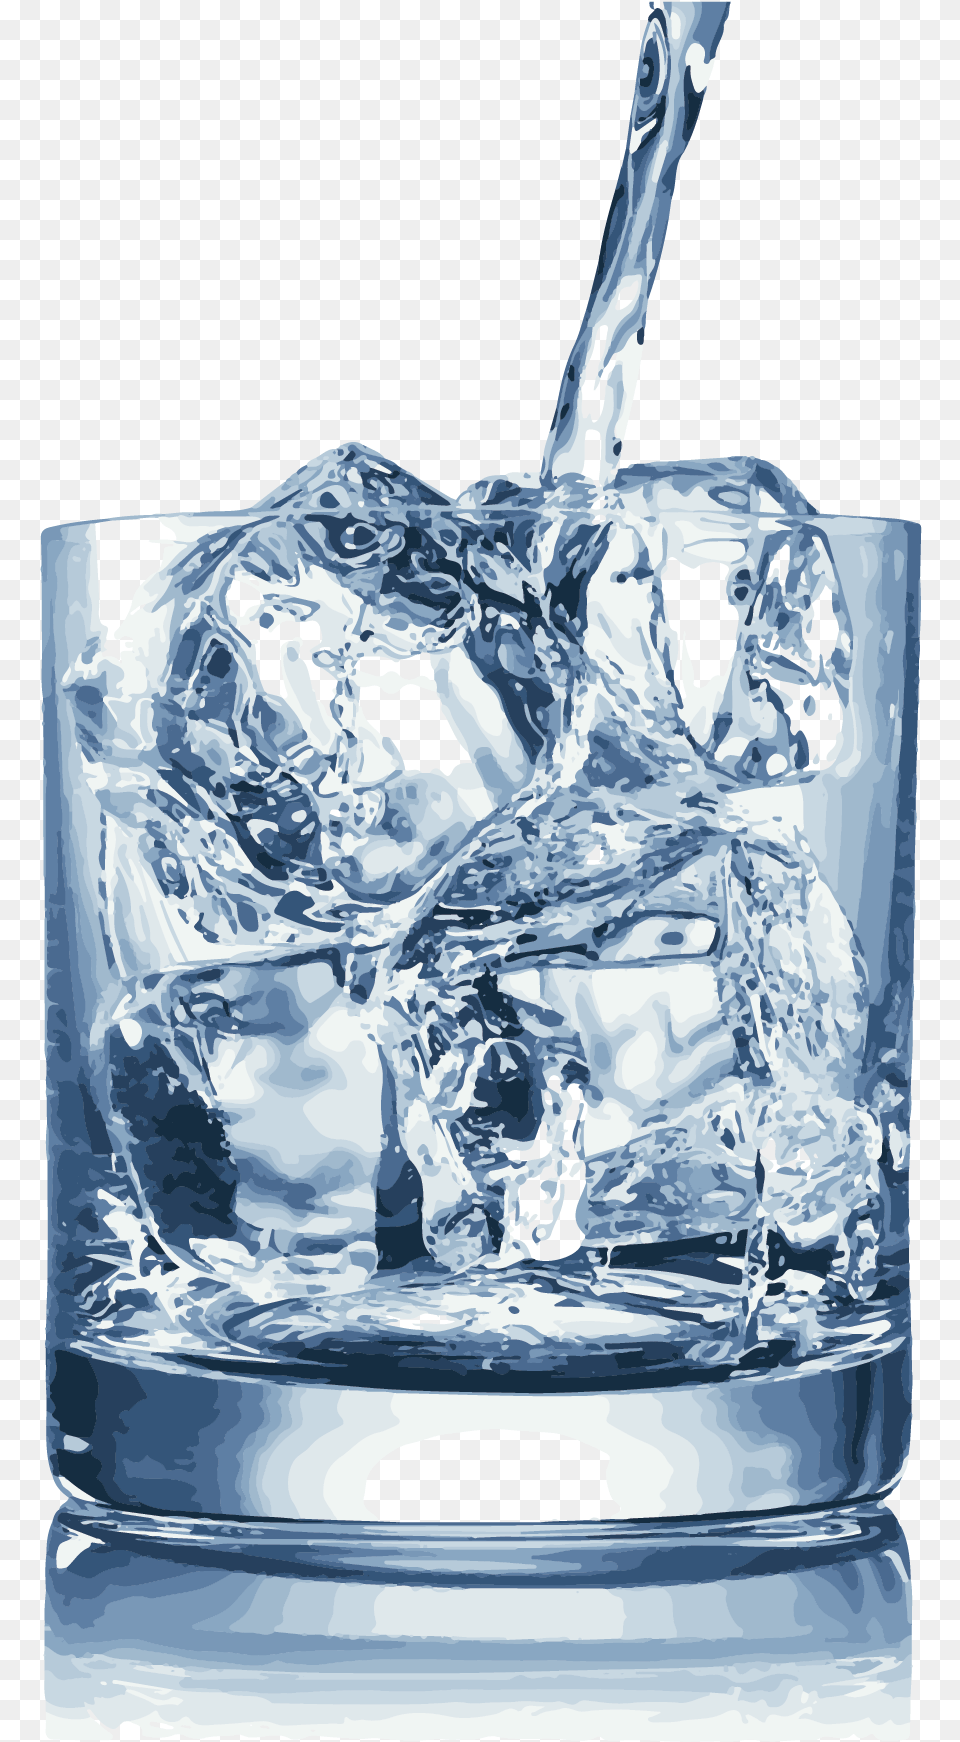 Cups And Ice Transprent Free Download Cup Of Ice Cubes, Glass, Adult, Wedding, Person Png Image